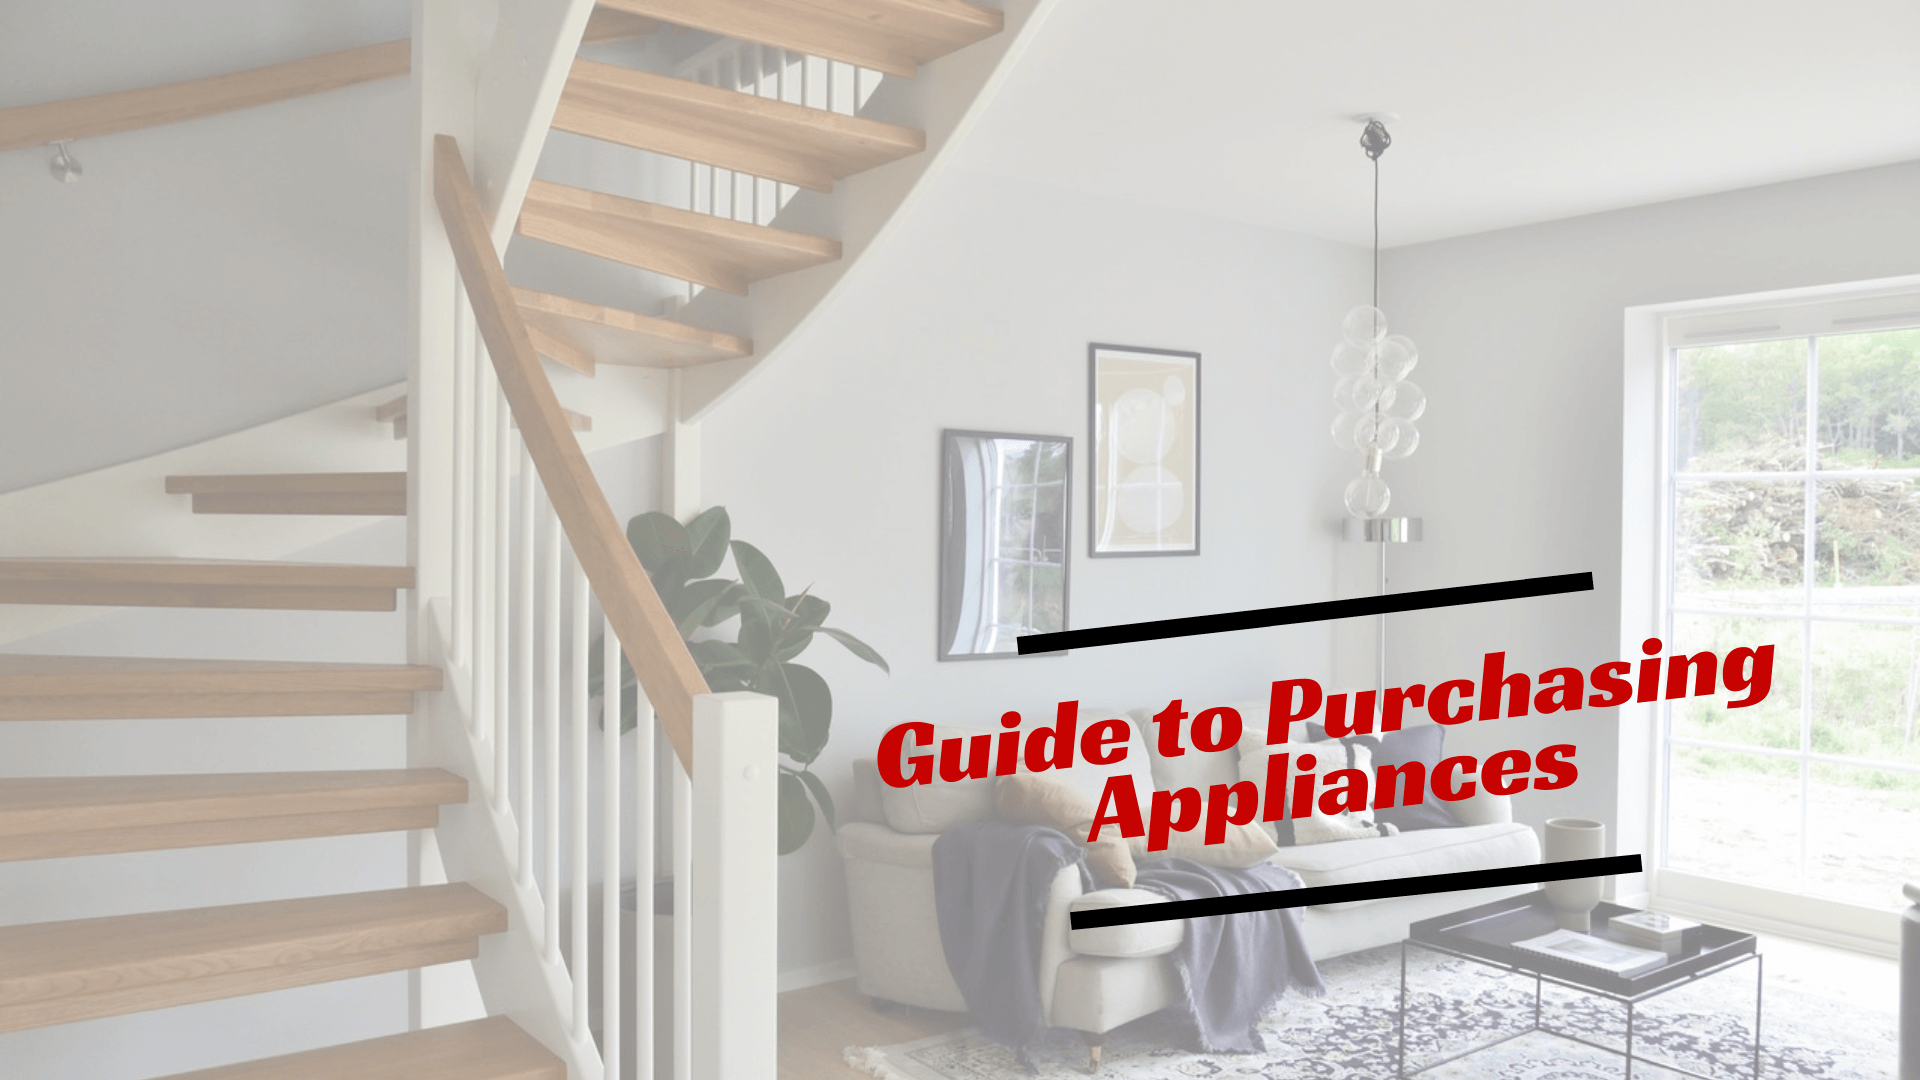 5 Rules to Follow When Purchasing Appliances for Your Norfolk Rental